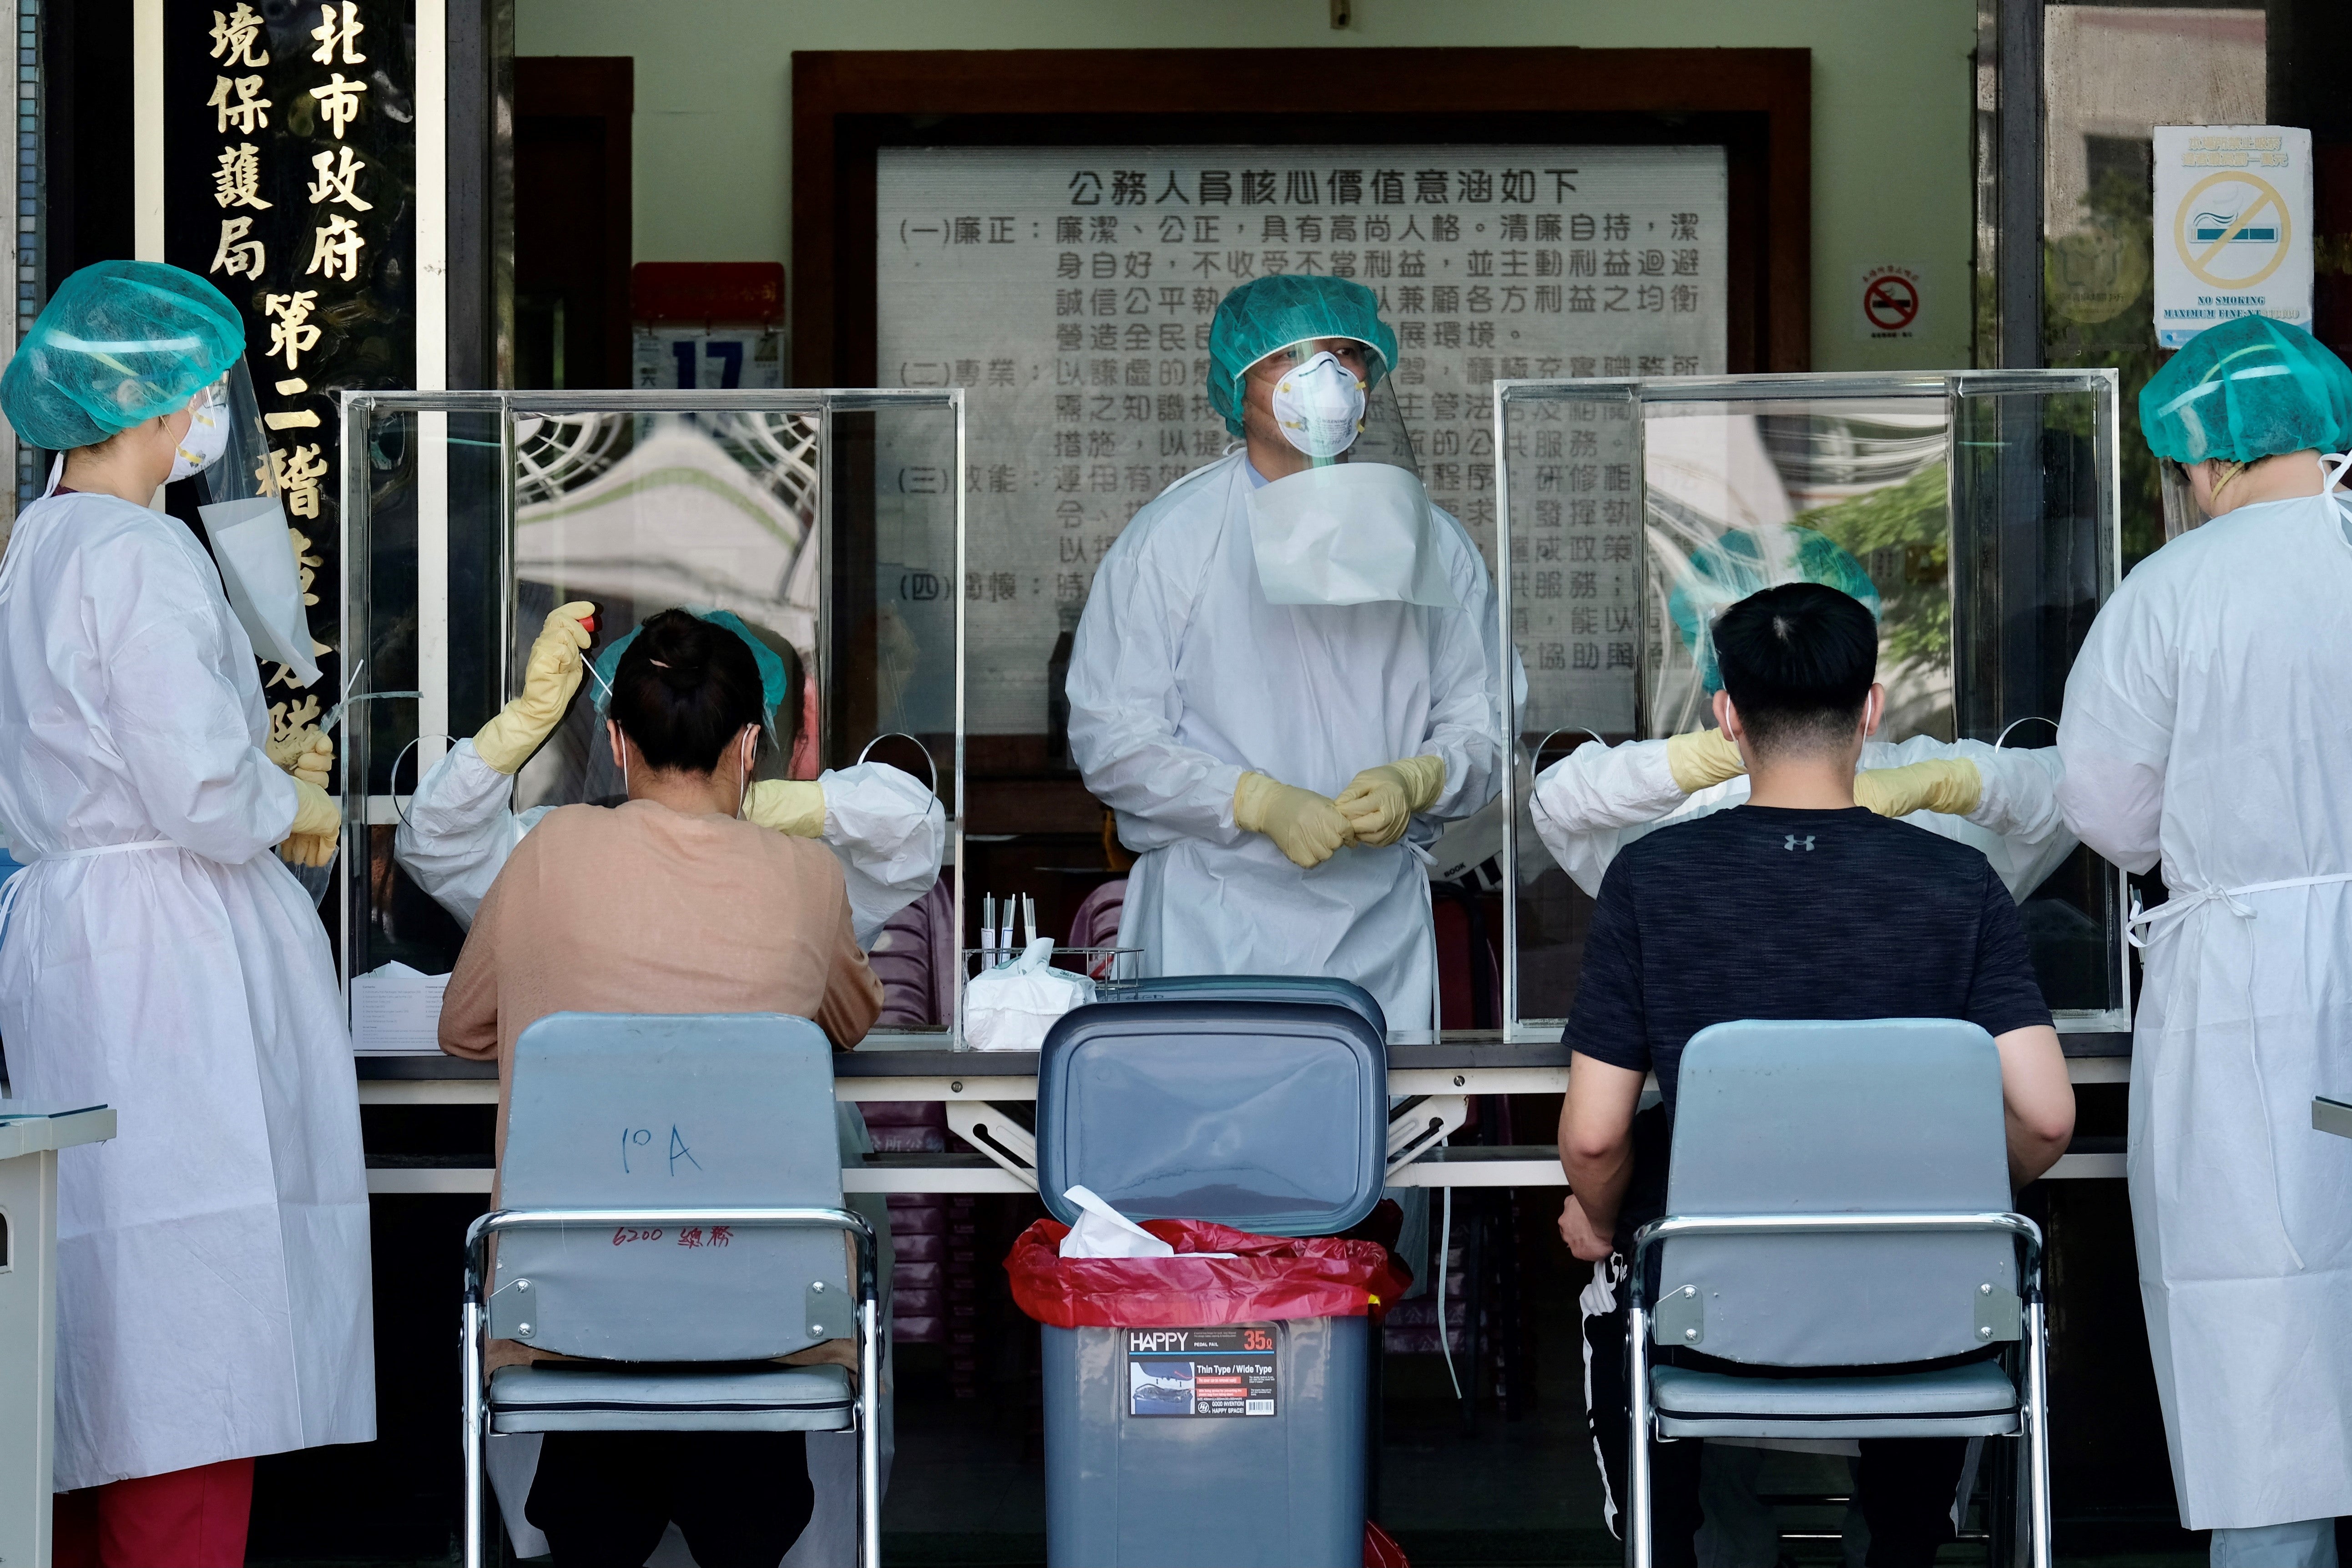 Medical staffers collect samples from local residents during a COVID-19 corona virus testing at the Xindian District in New Taipei City